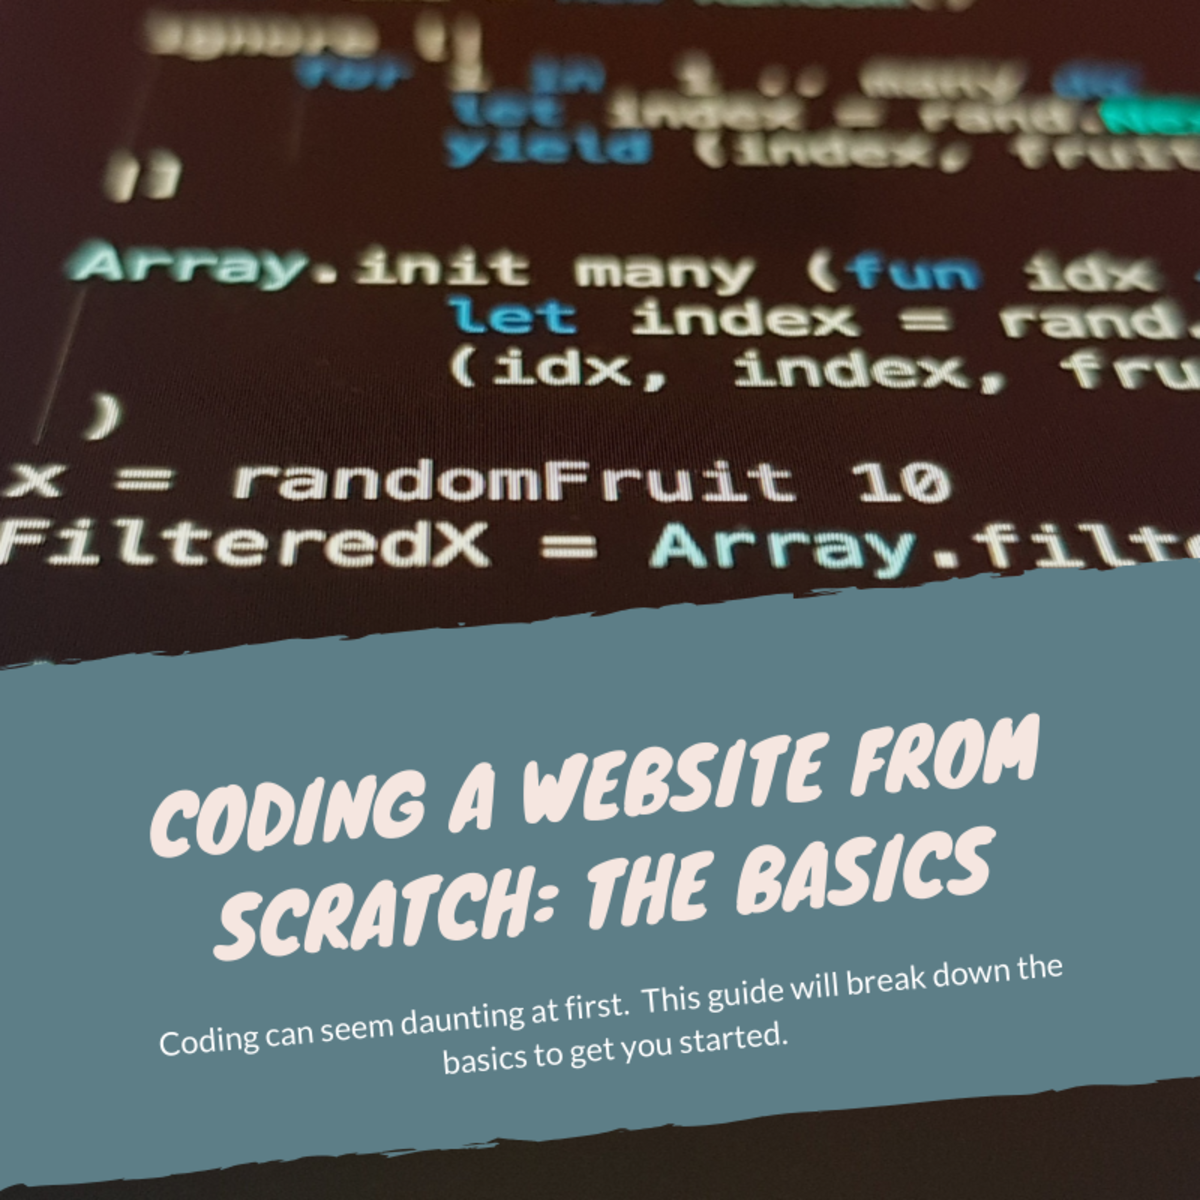 Learn how to code a website from scratch.